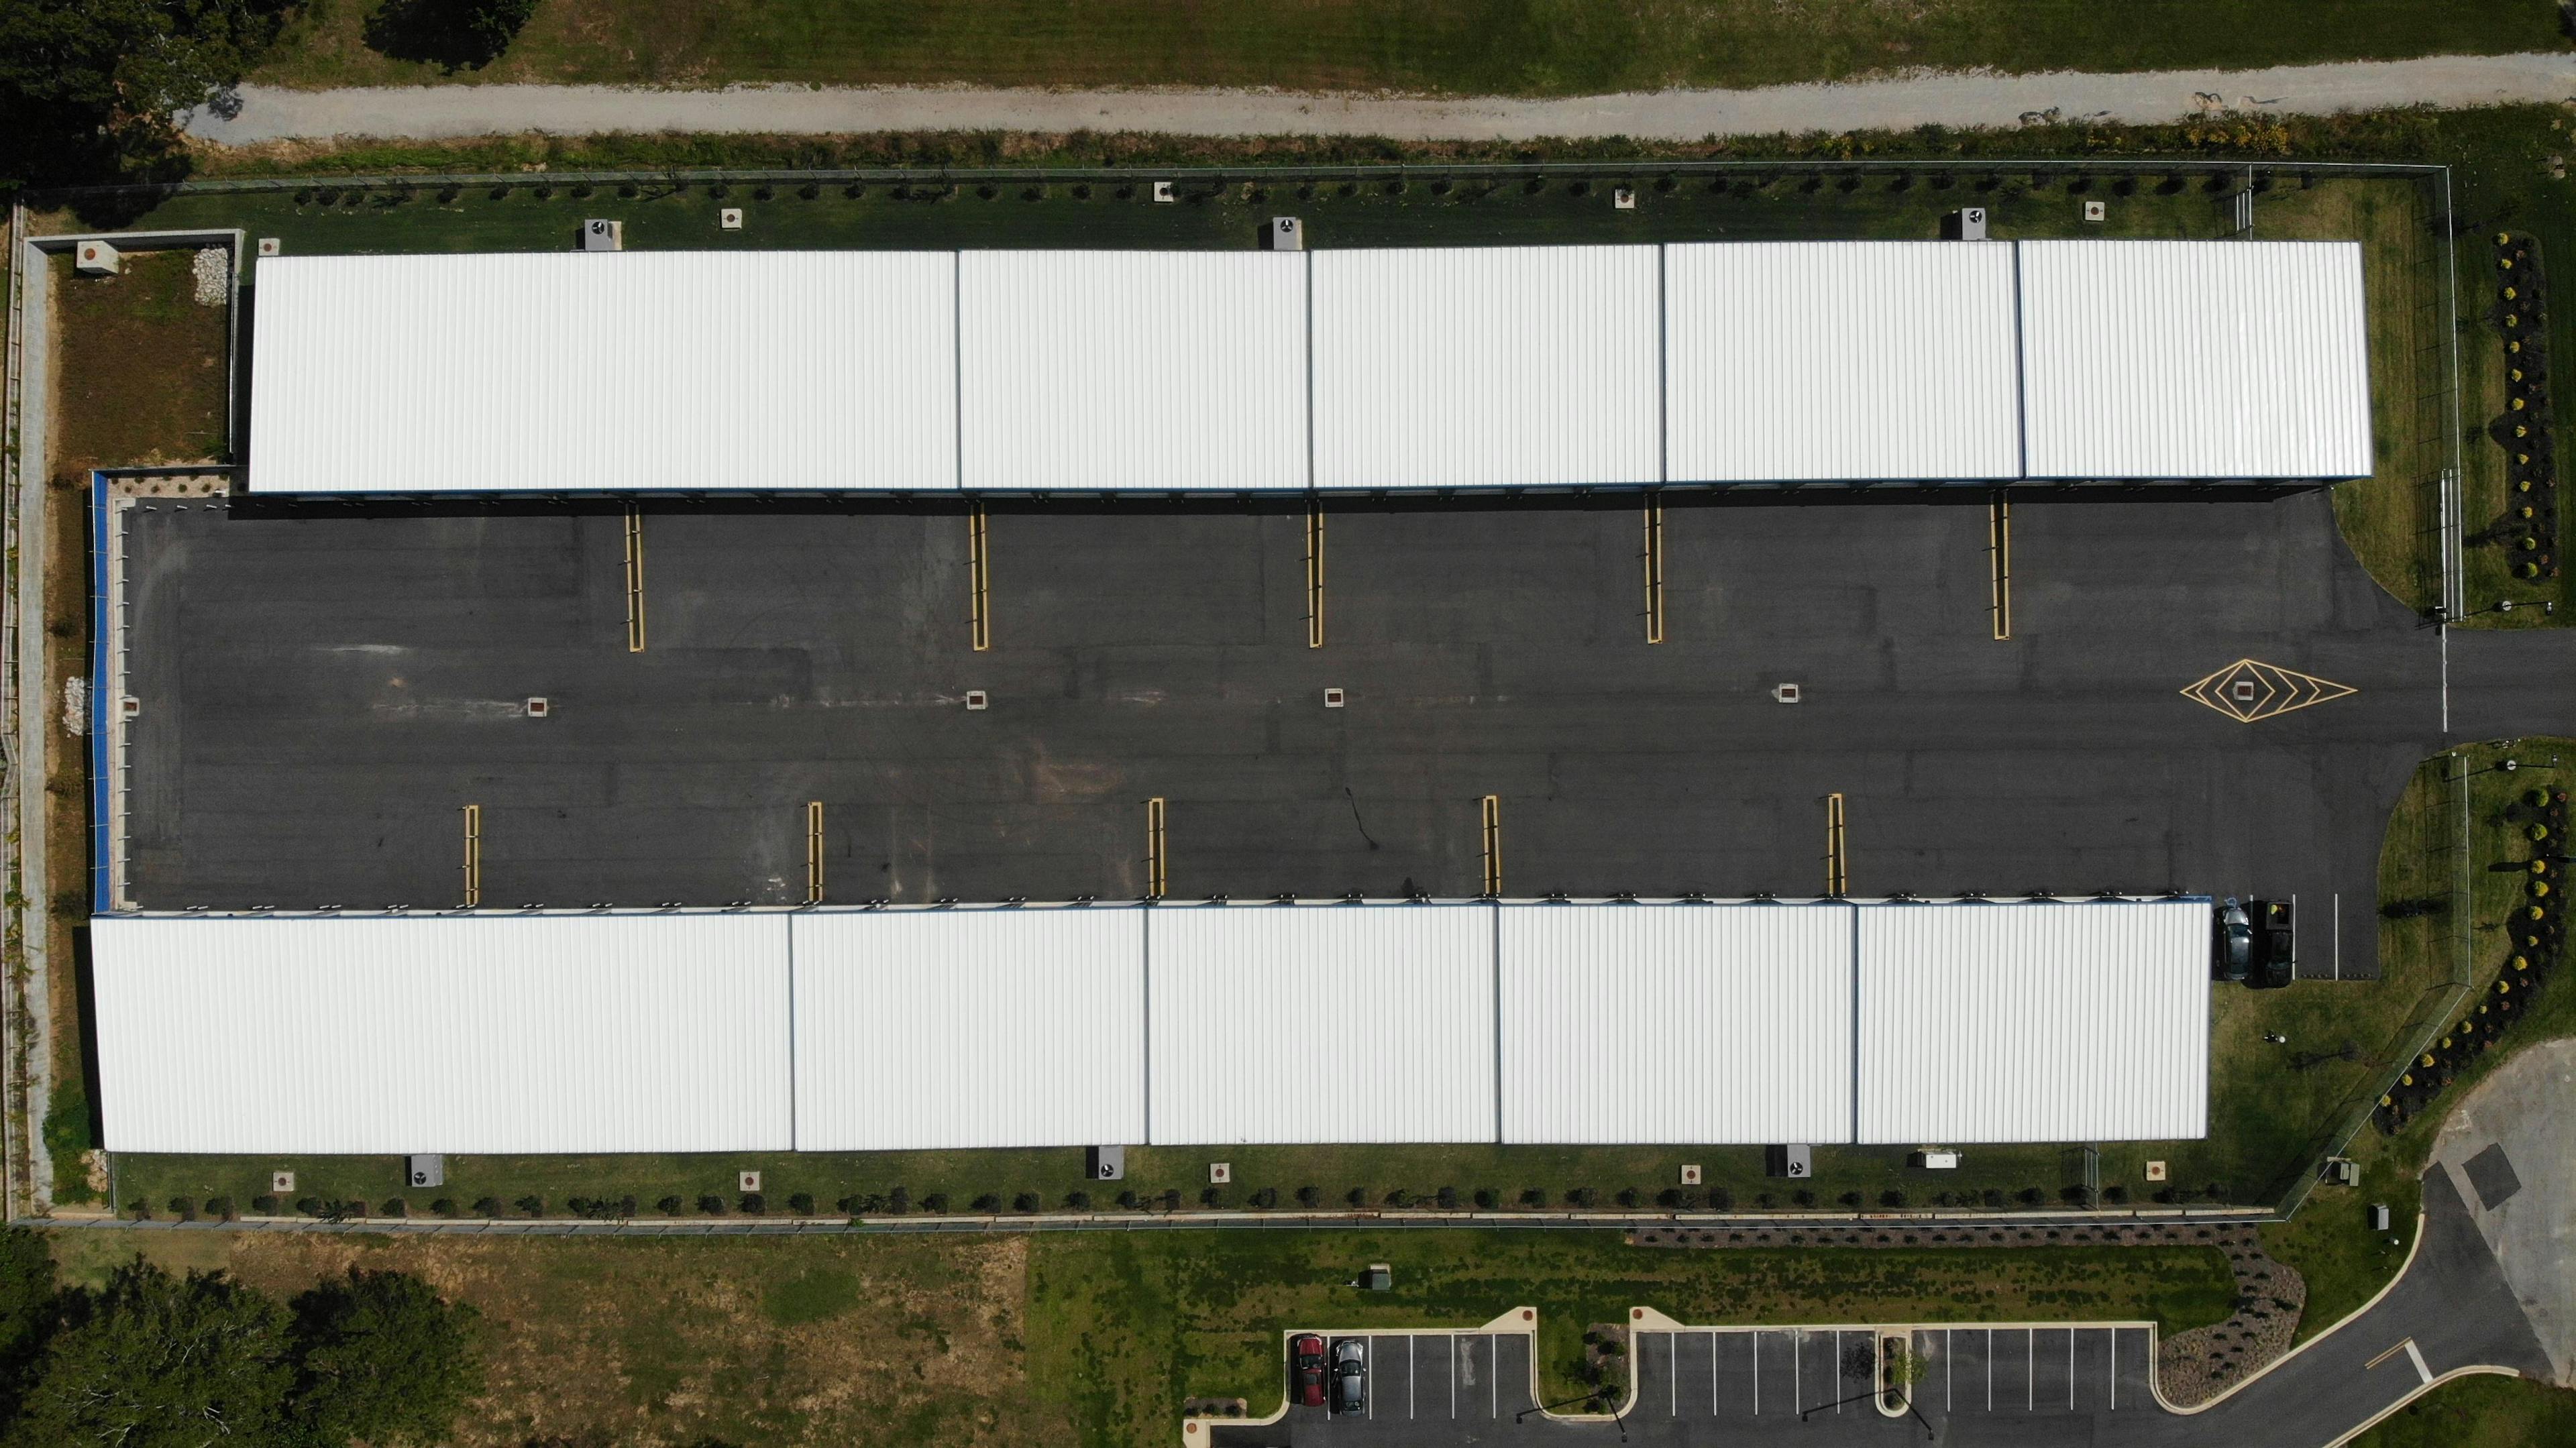 Overview of Spanish Fort Climate-Controlled Oversized Storage Facility showing wide driveway and large units